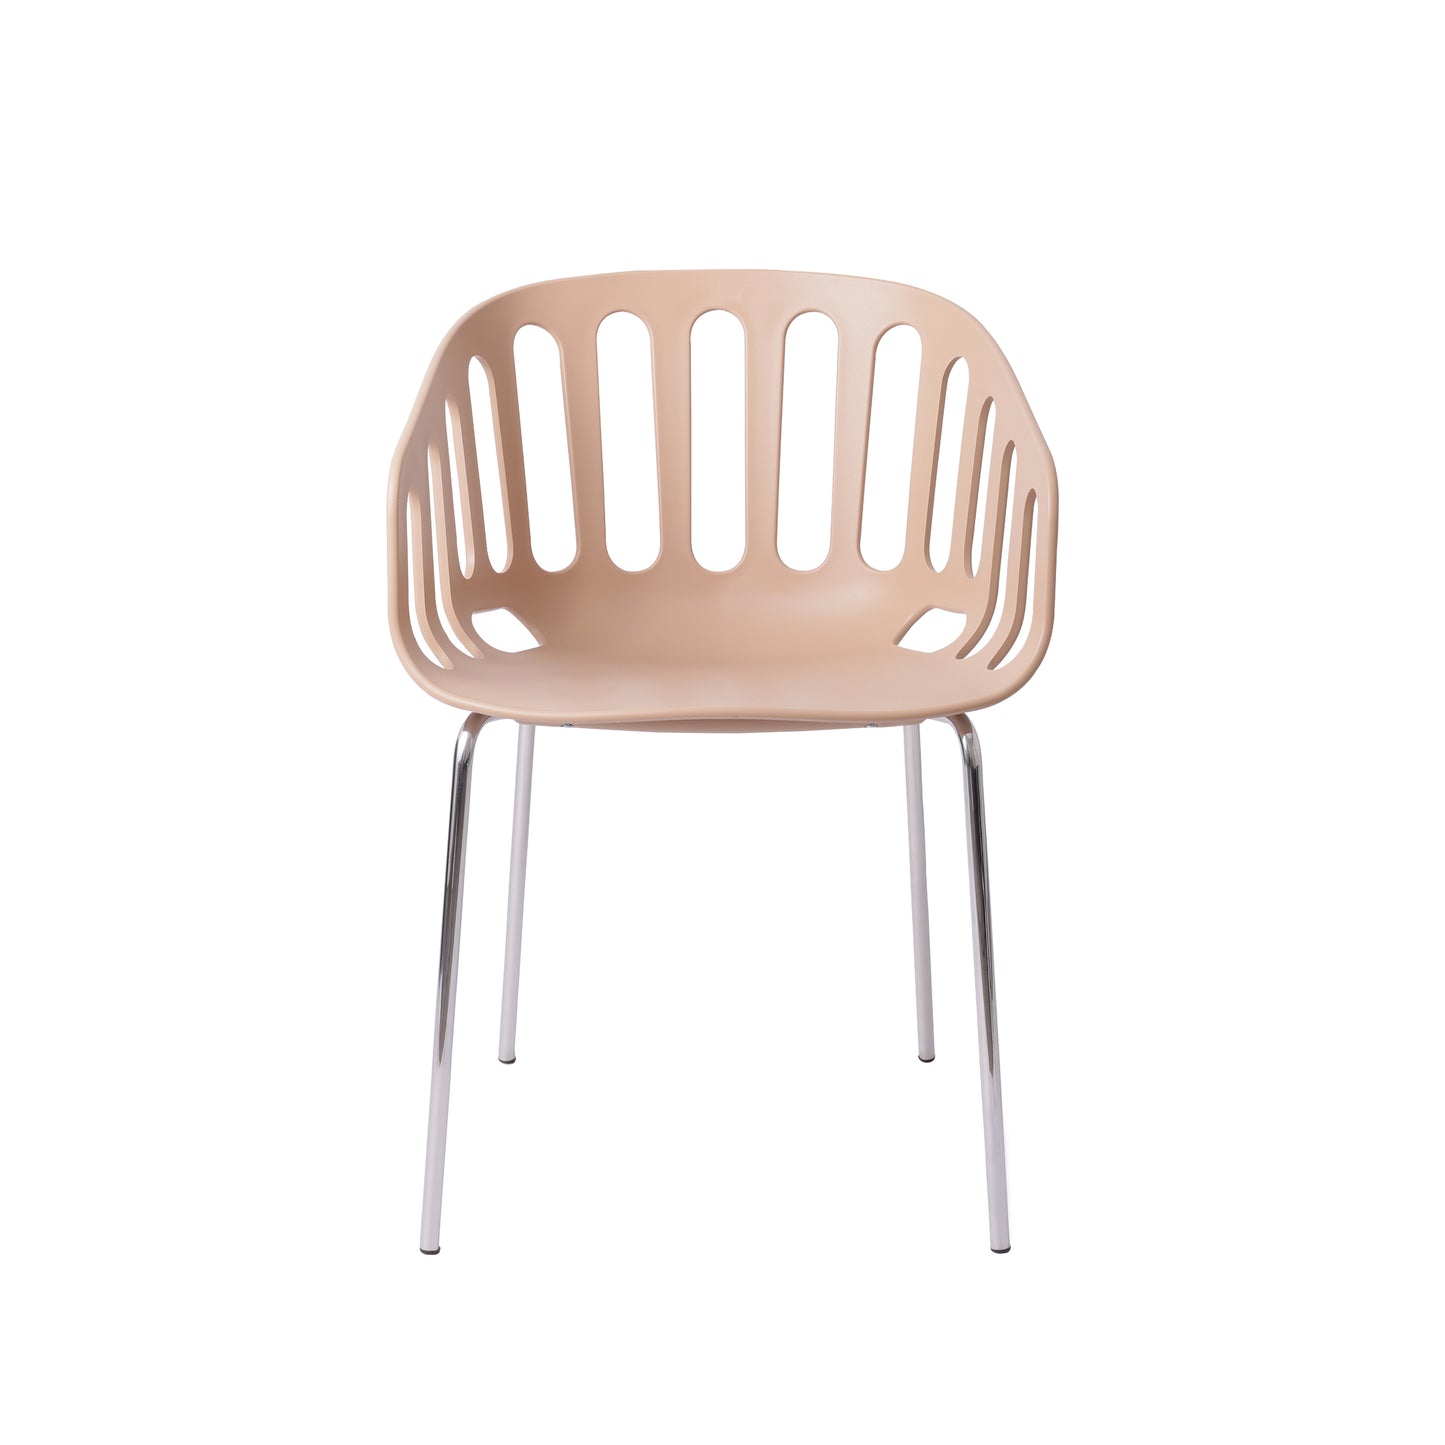 Basket Dining Chair, Coffee Color